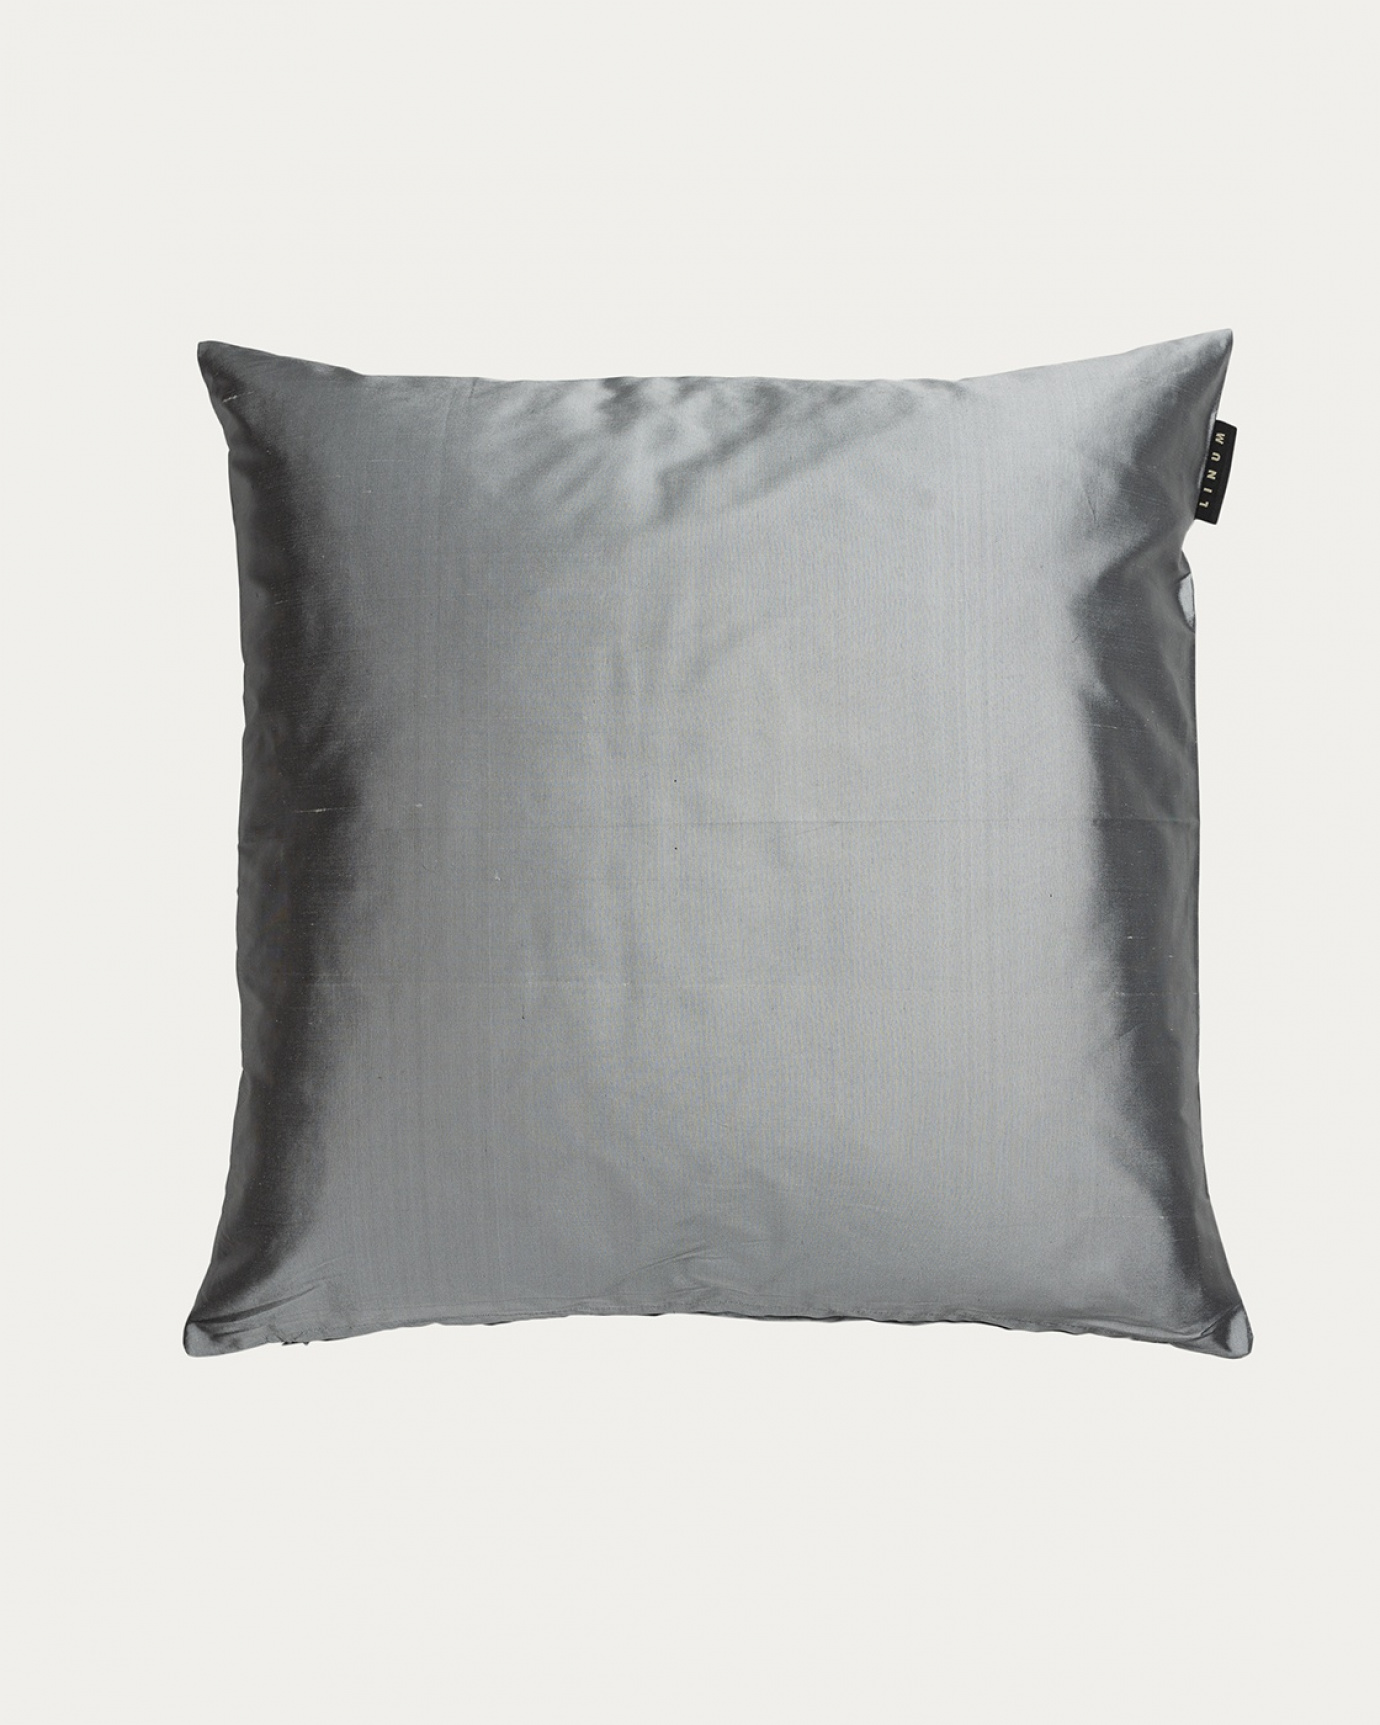 Product image light grey SILK cushion cover made of 100% dupion silk that gives a nice lustre from LINUM DESIGN. Size 50x50 cm.